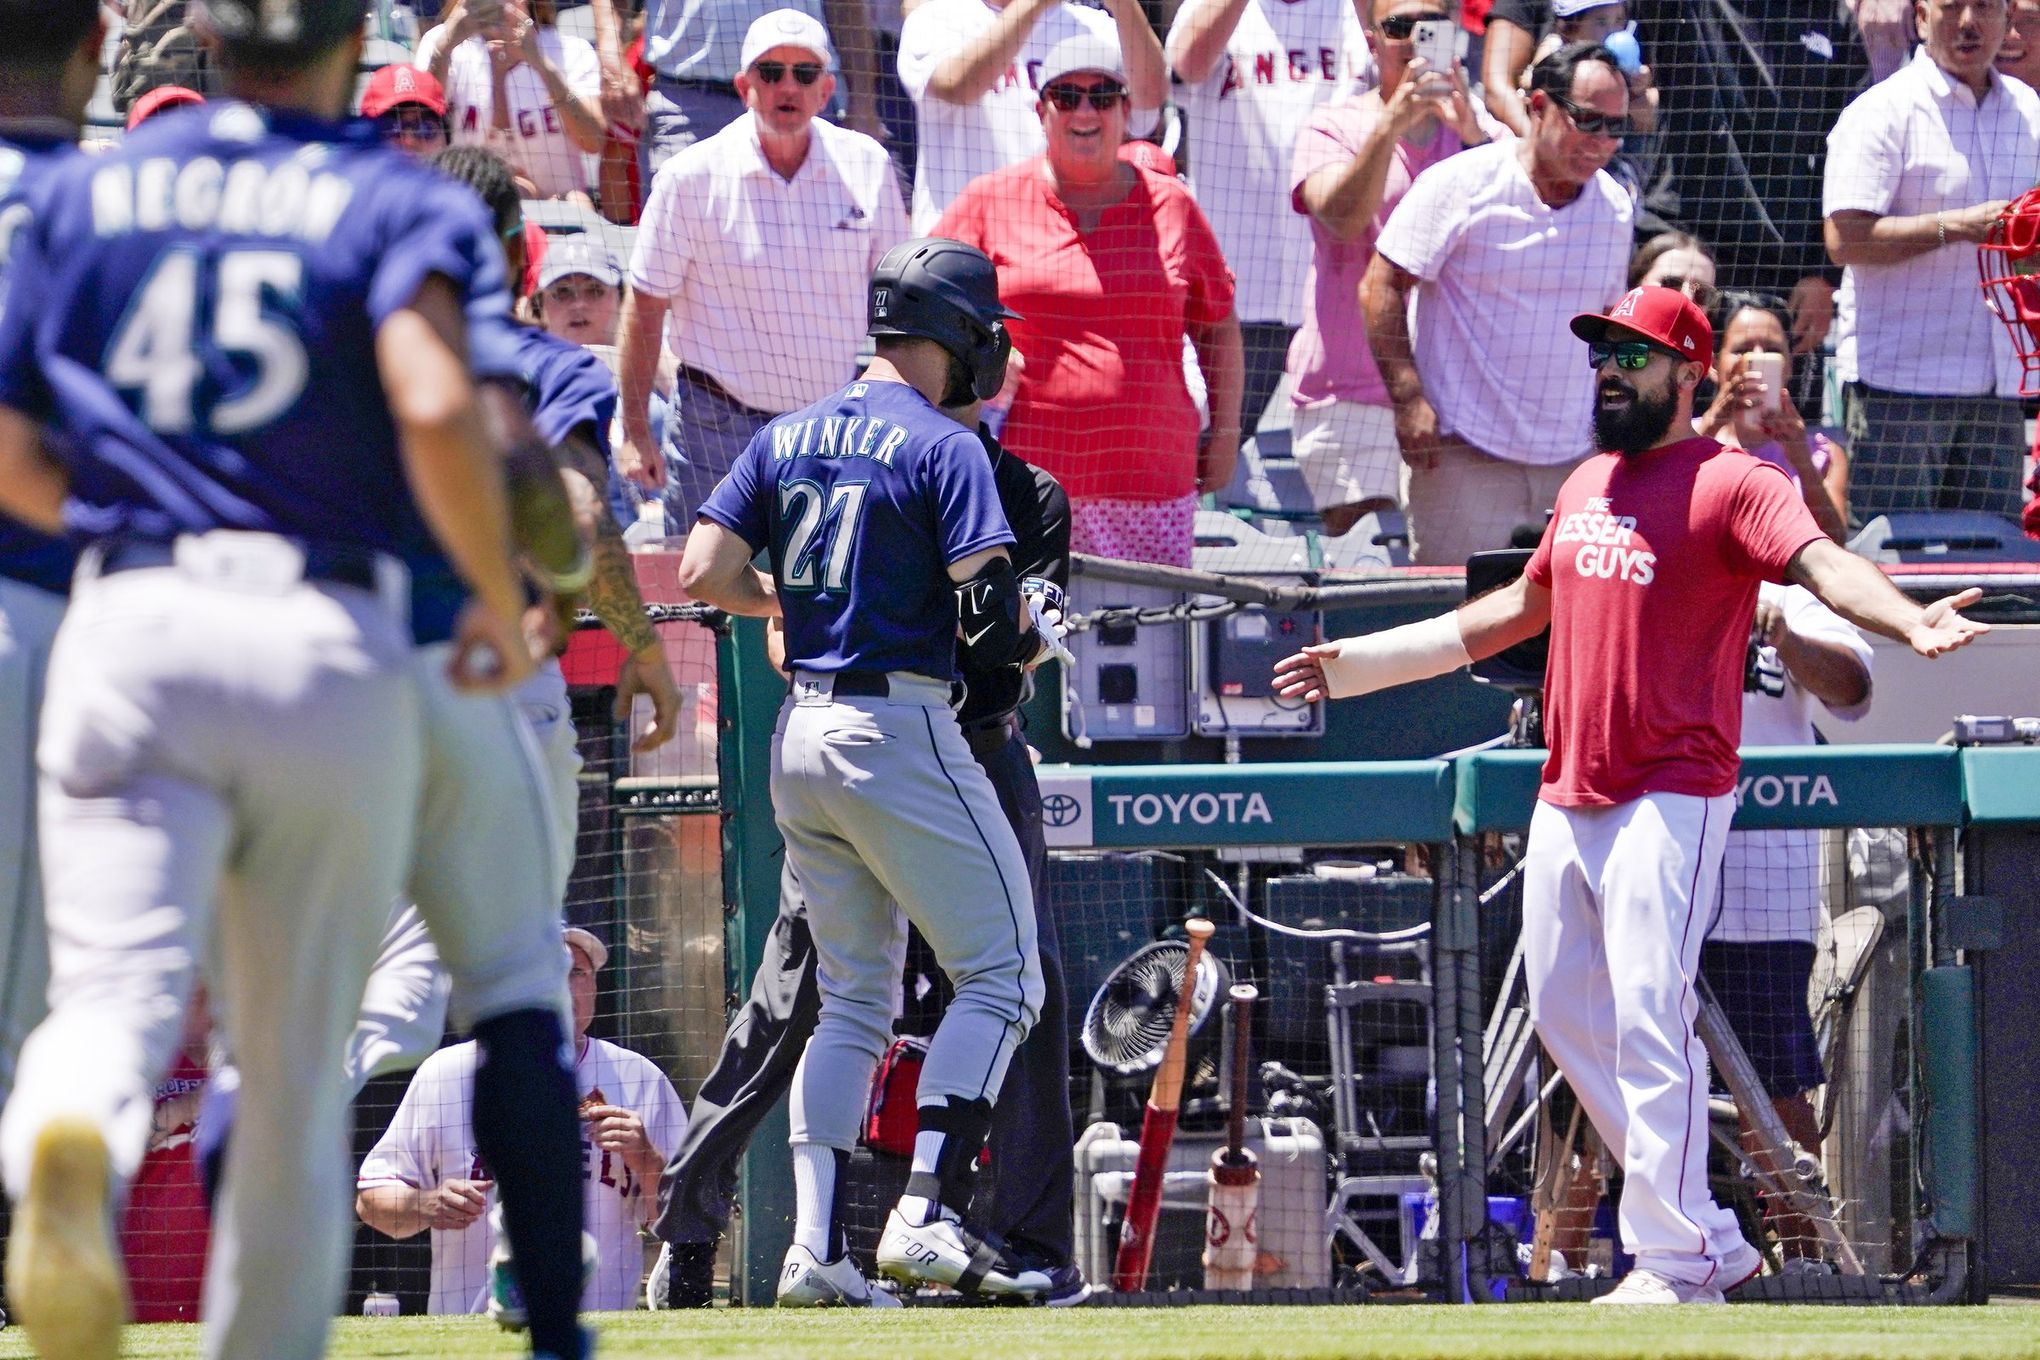 Five Rays, Three Red Sox Players Suspended After Brawl